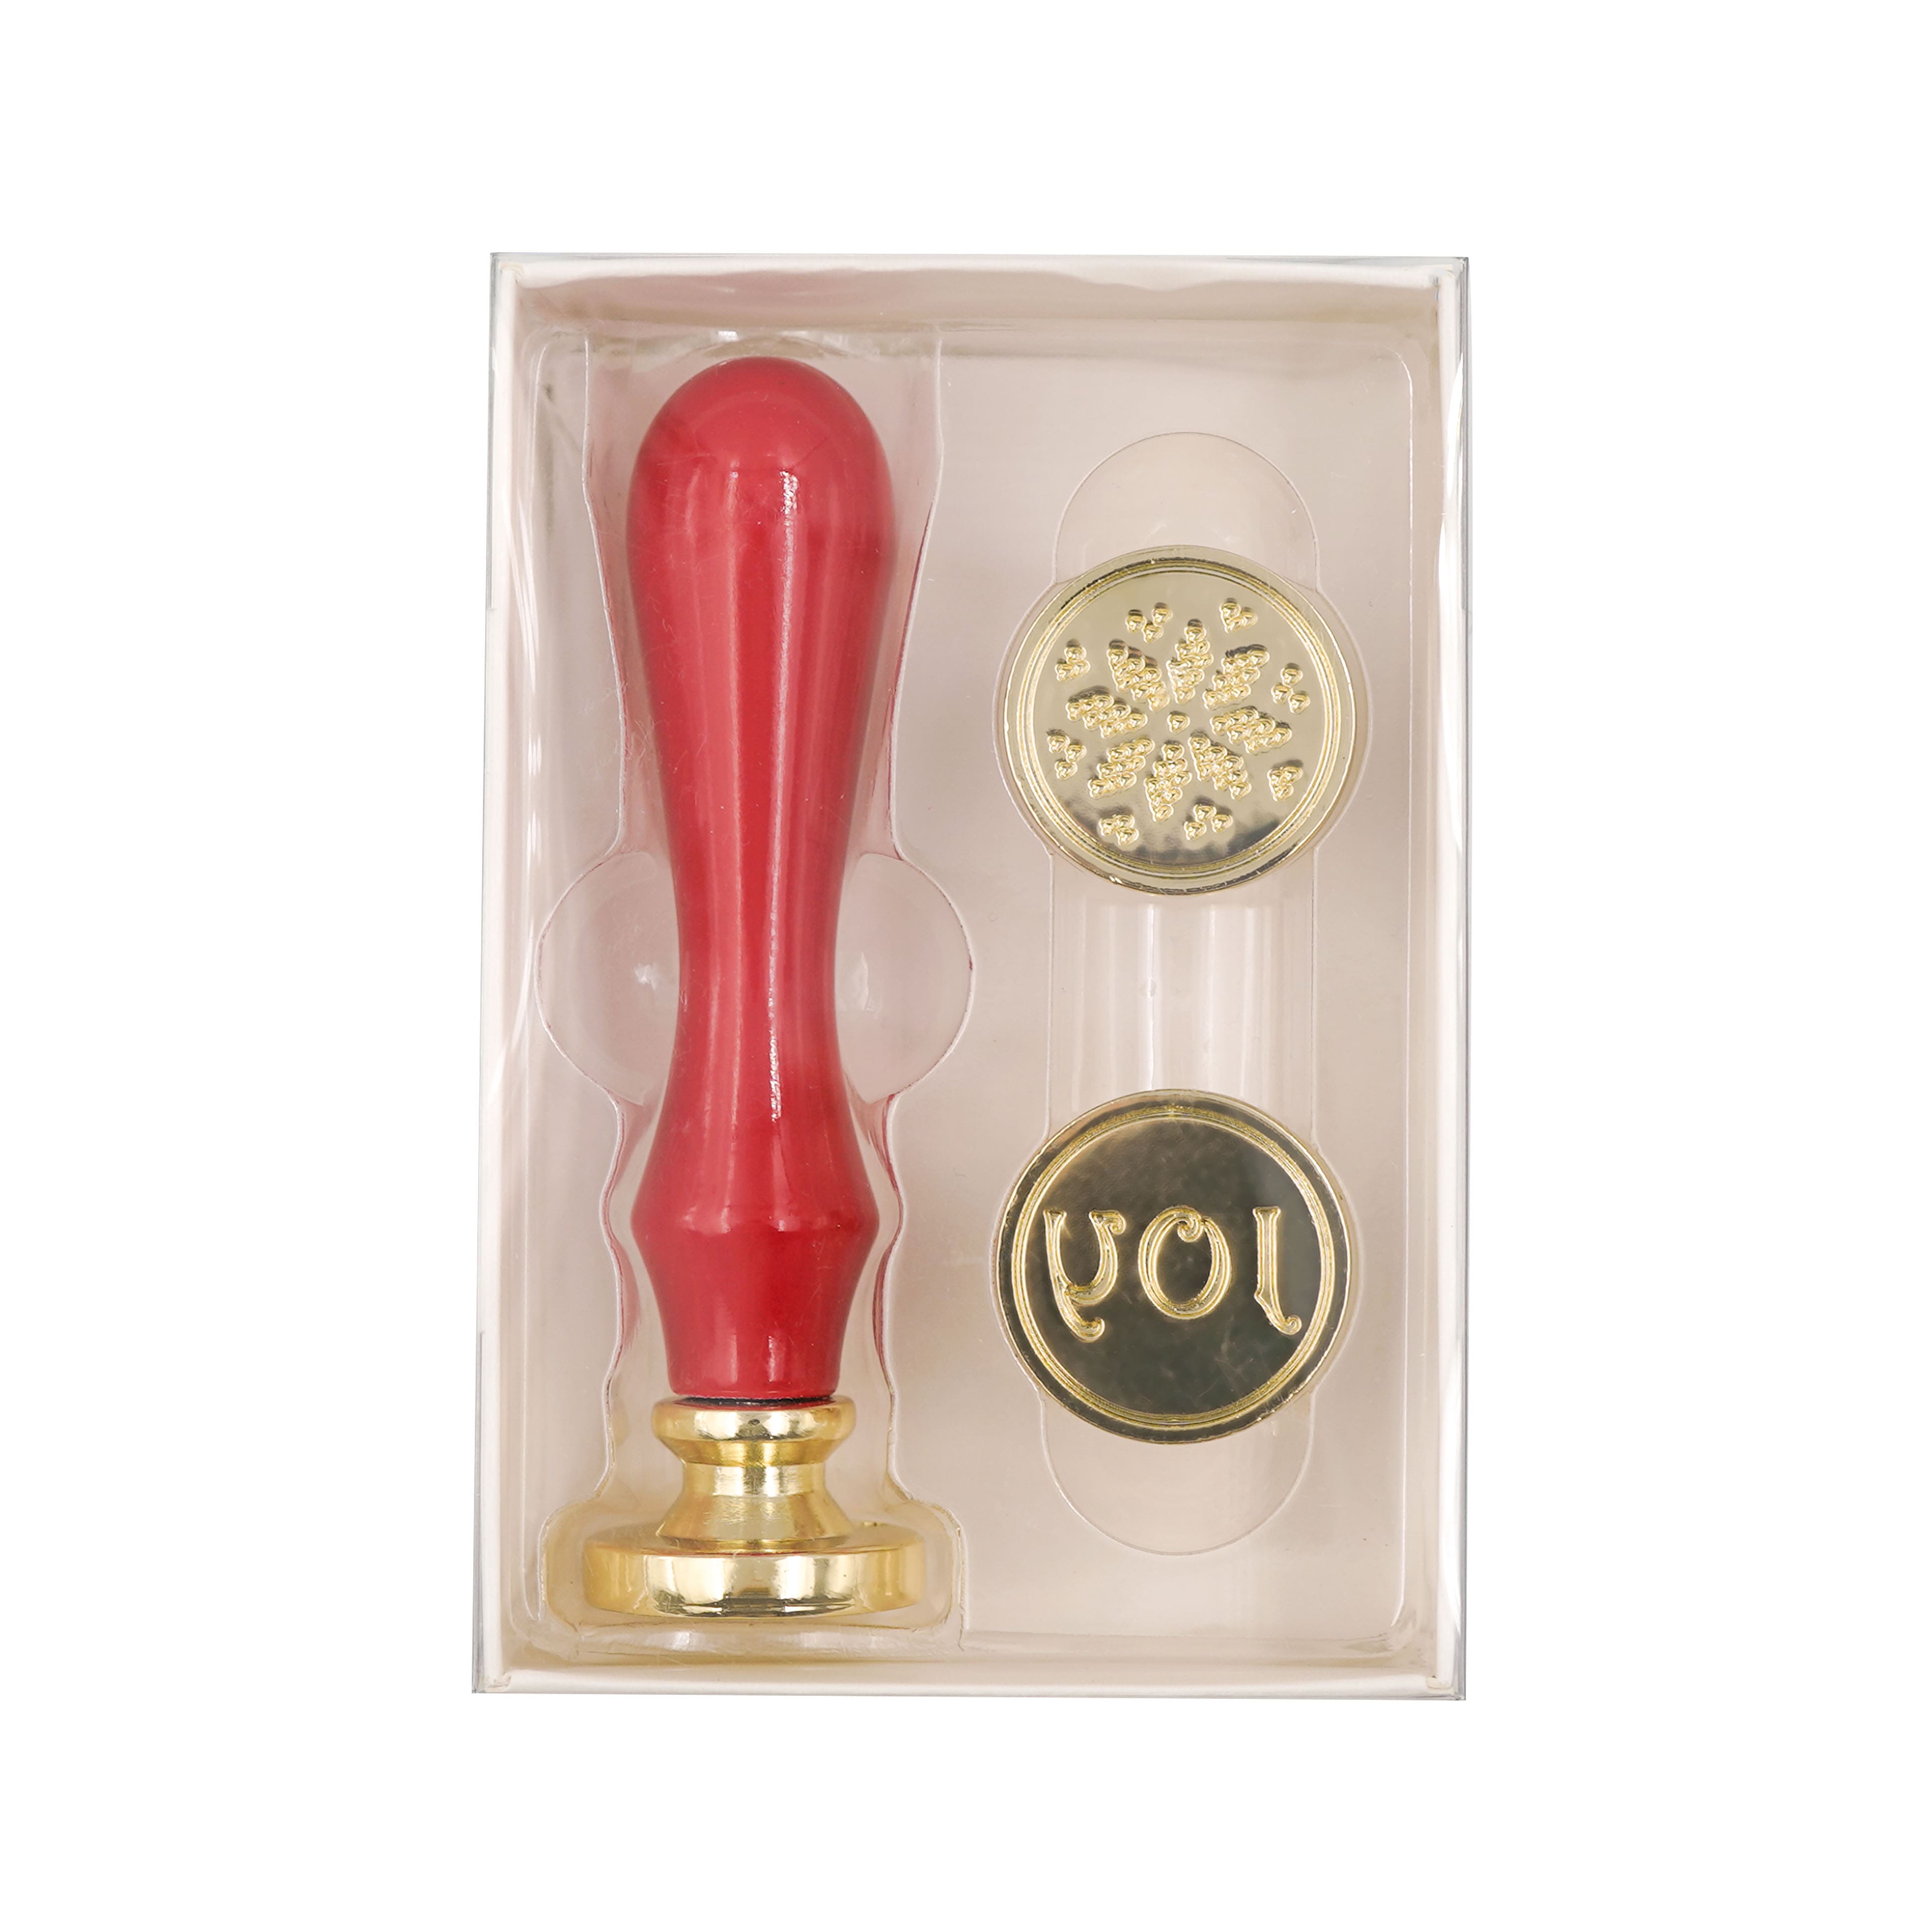 Thank You Sealing Wax Stamp by Recollections™